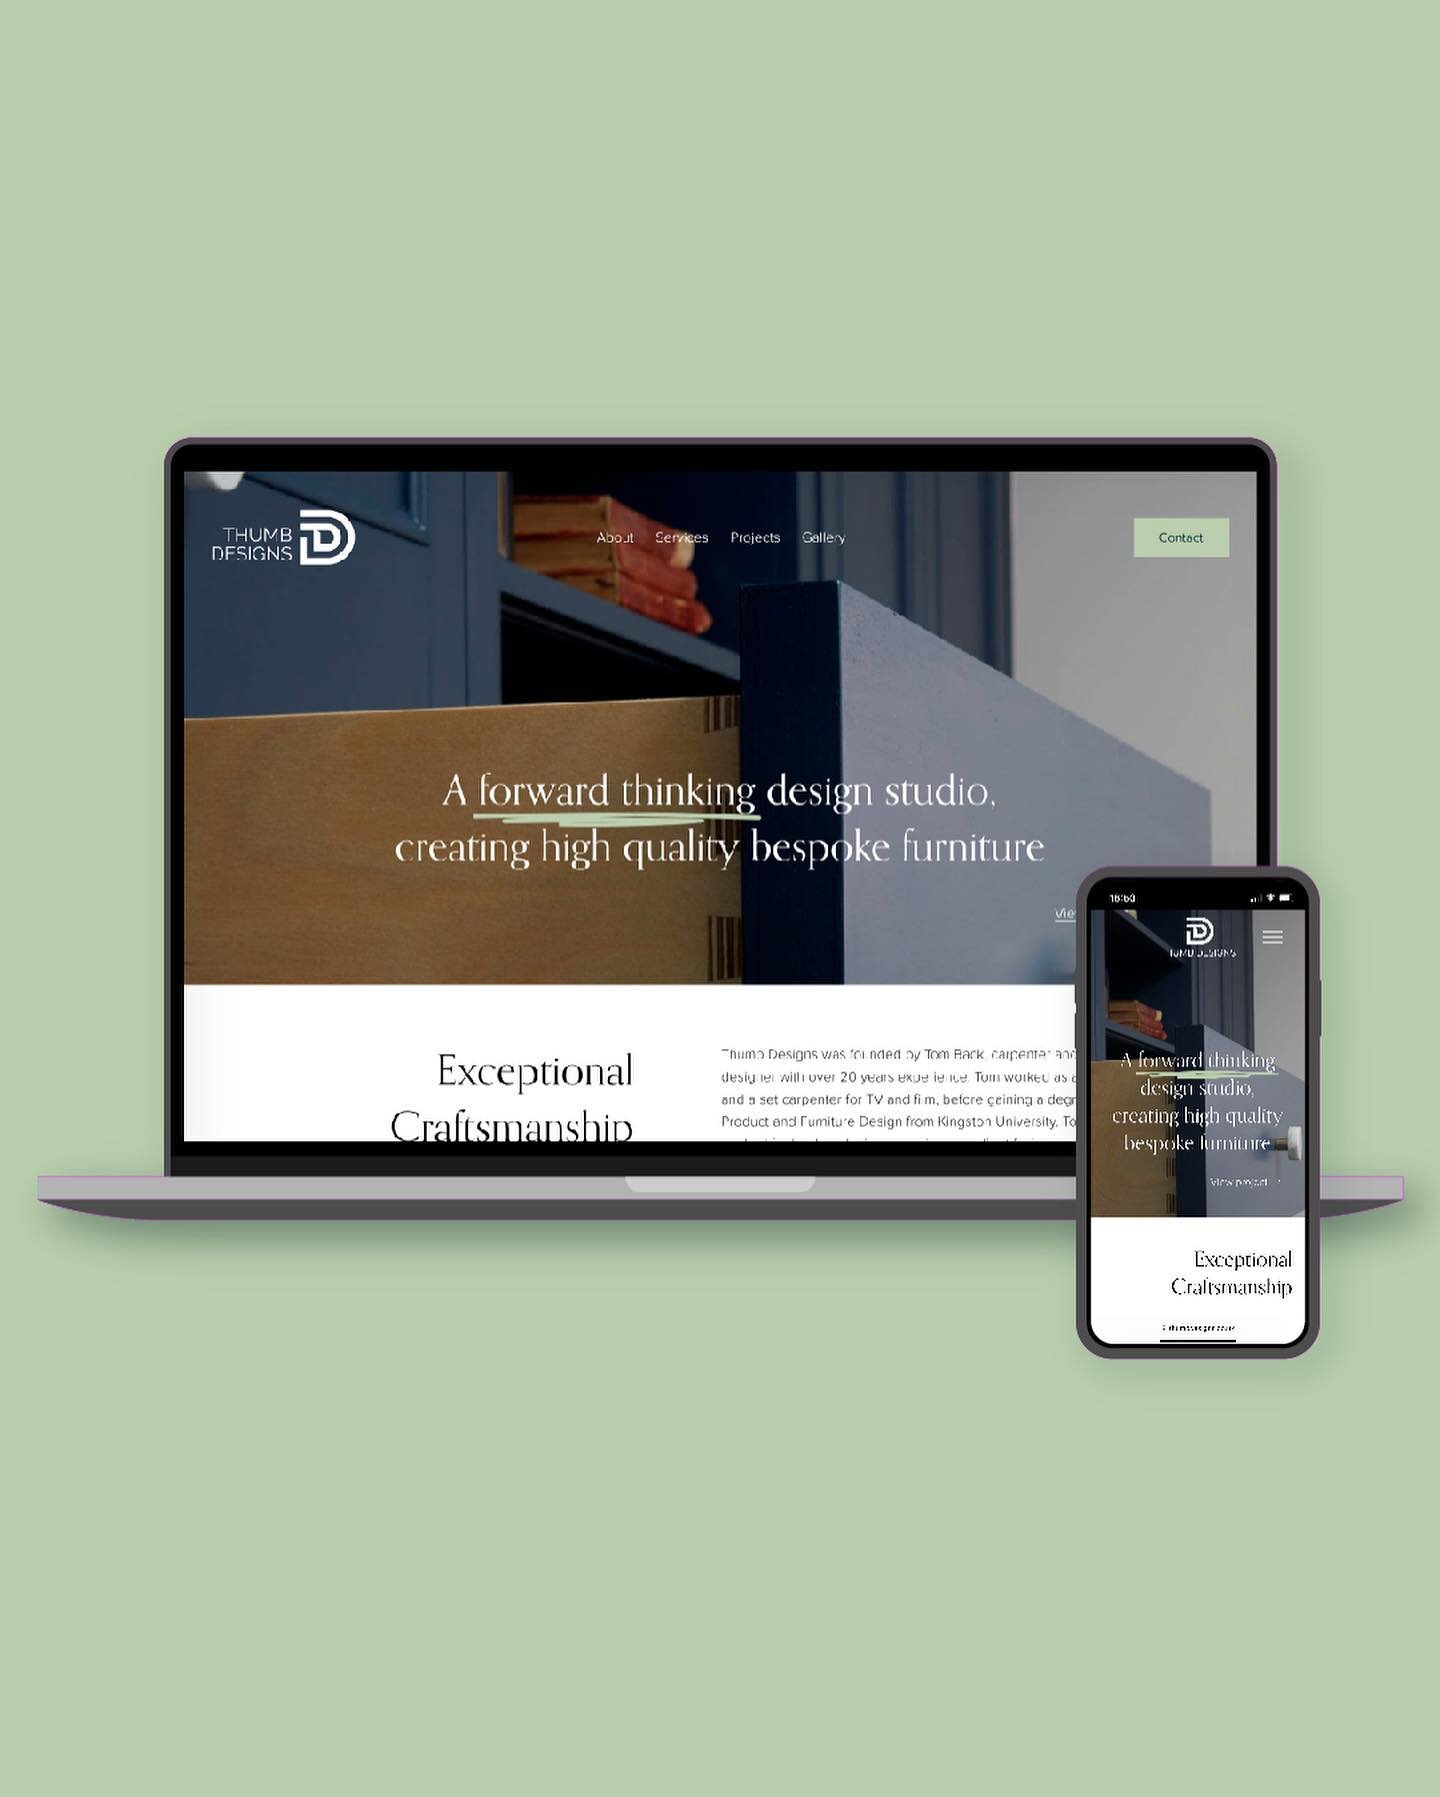 As part of the visual refresh, we built a new website for @thumbdesigns to reflect the quality of finish and attention to detail of Tom&rsquo;s designs and construction. This meant a clean, contemporary design and minimal copy to bring the lovely pho